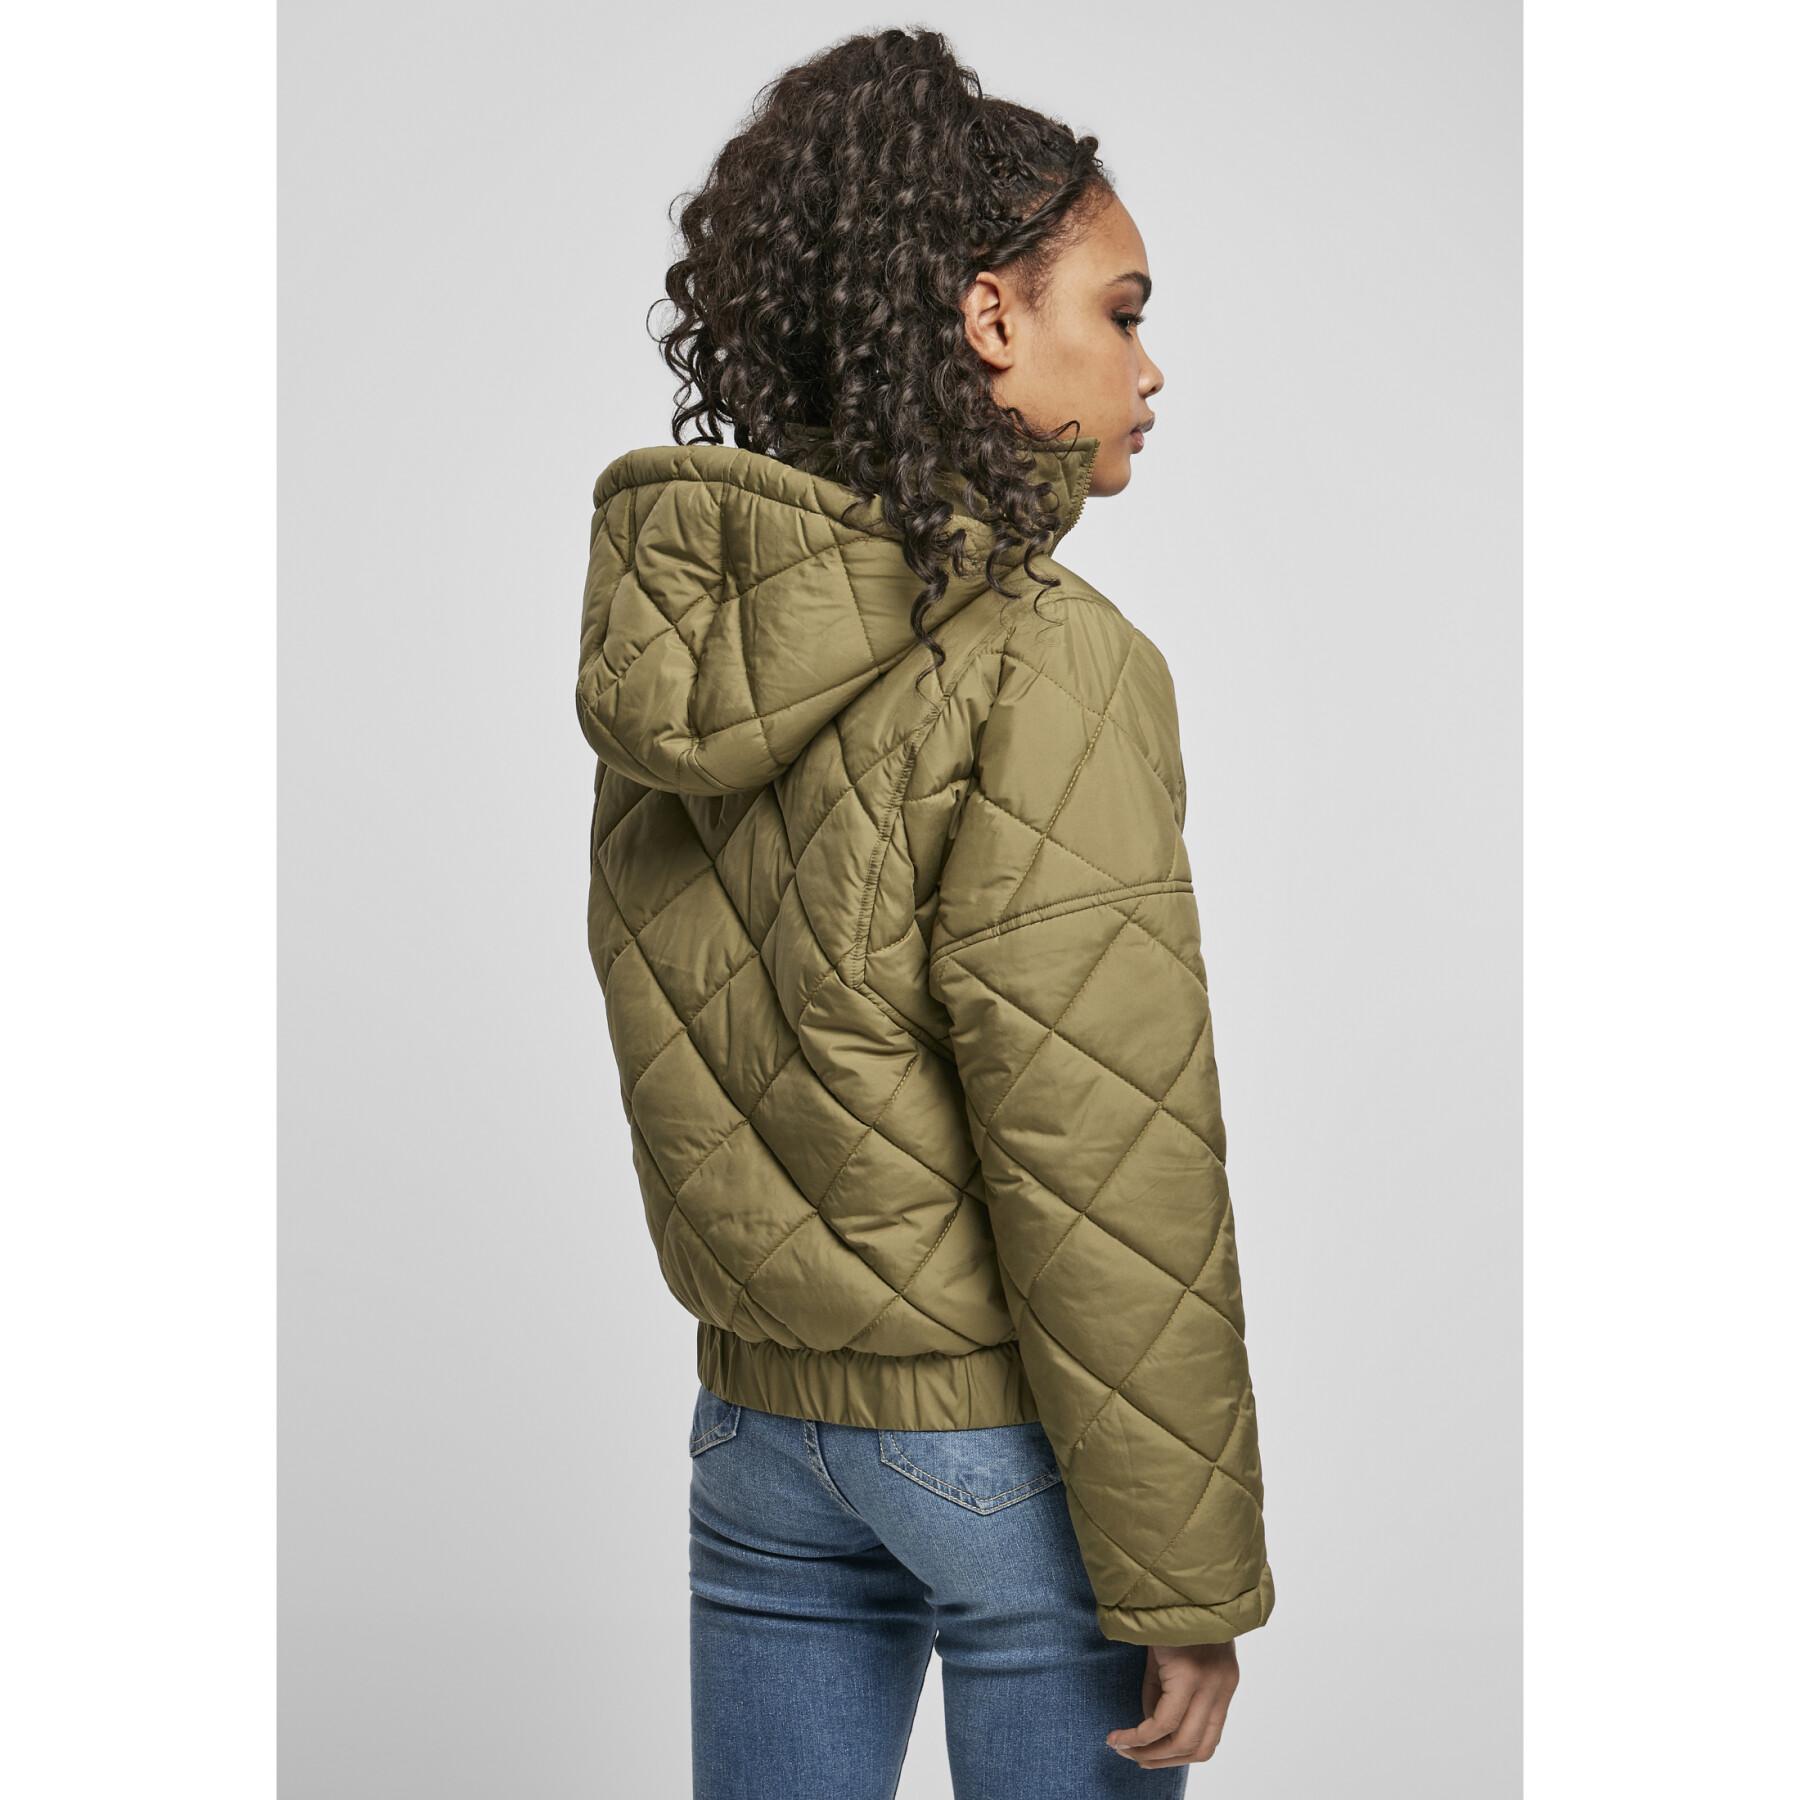 Women's large size down jacket Urban Classics oversized diamond quilted pull over